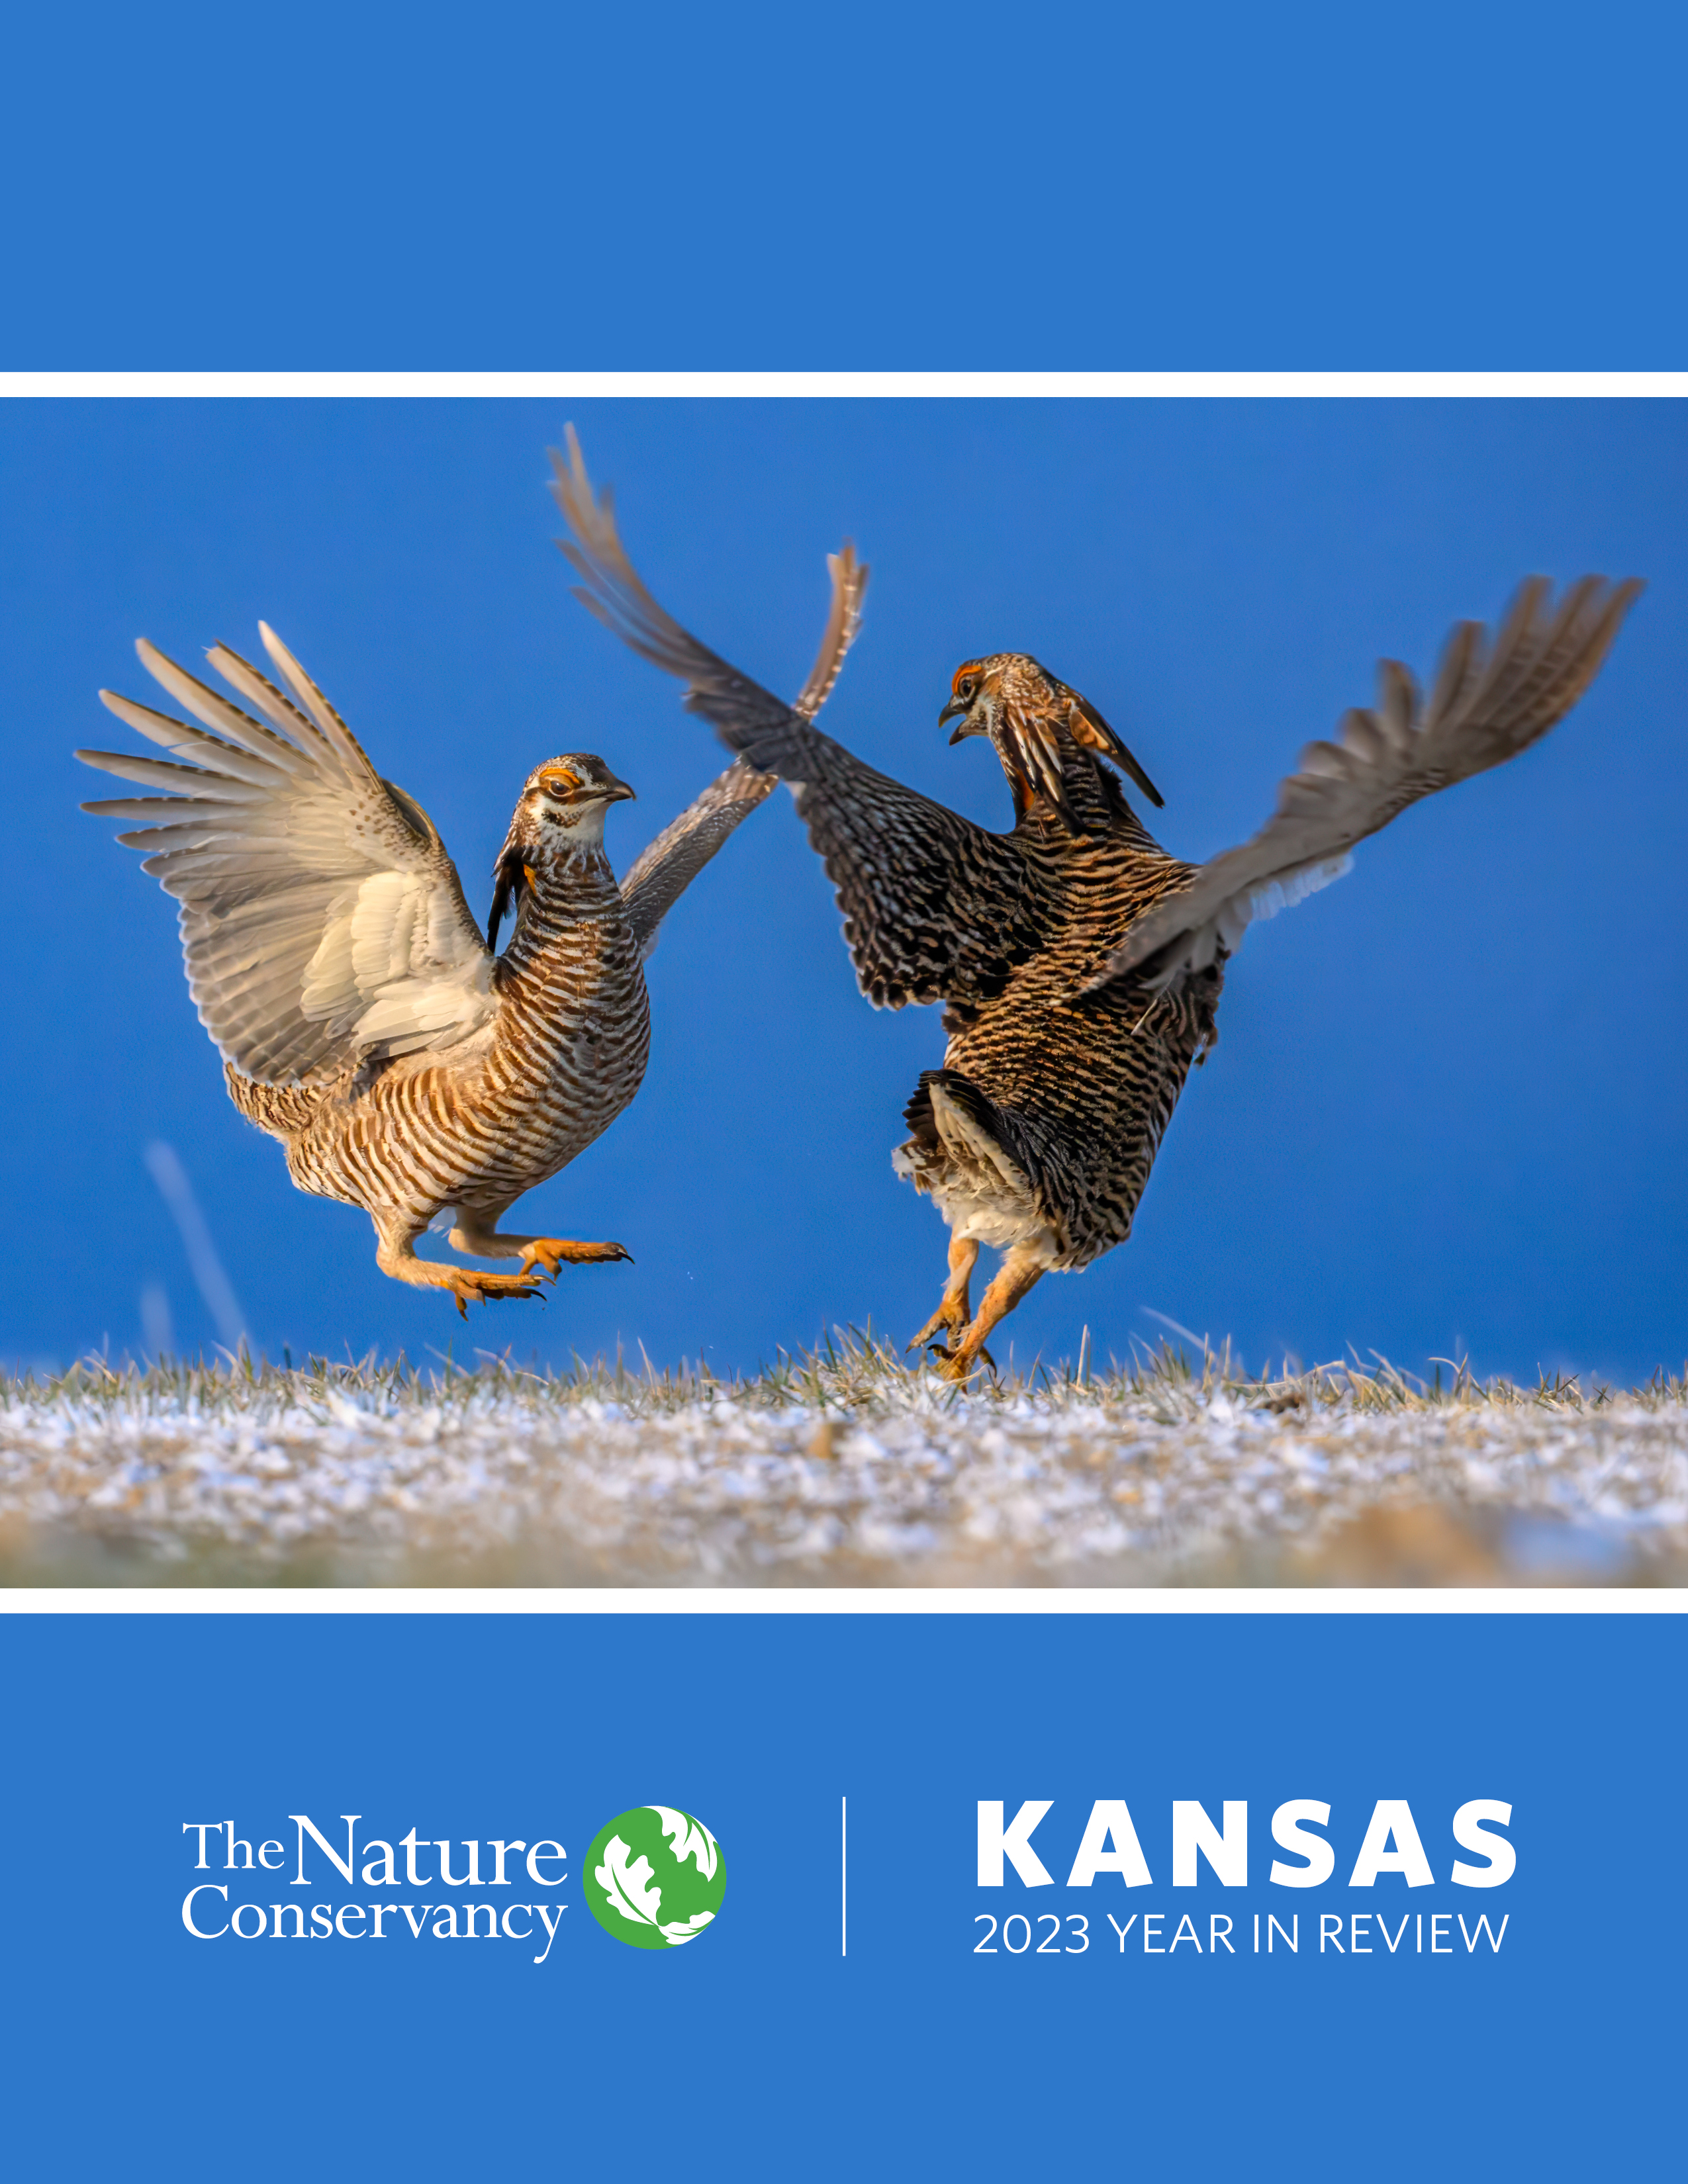 Blue book cover with image of two prairie chickens facing each other with wings in the air. Text reads: The Nature Conservancy Kansas 2023 Year In Review.